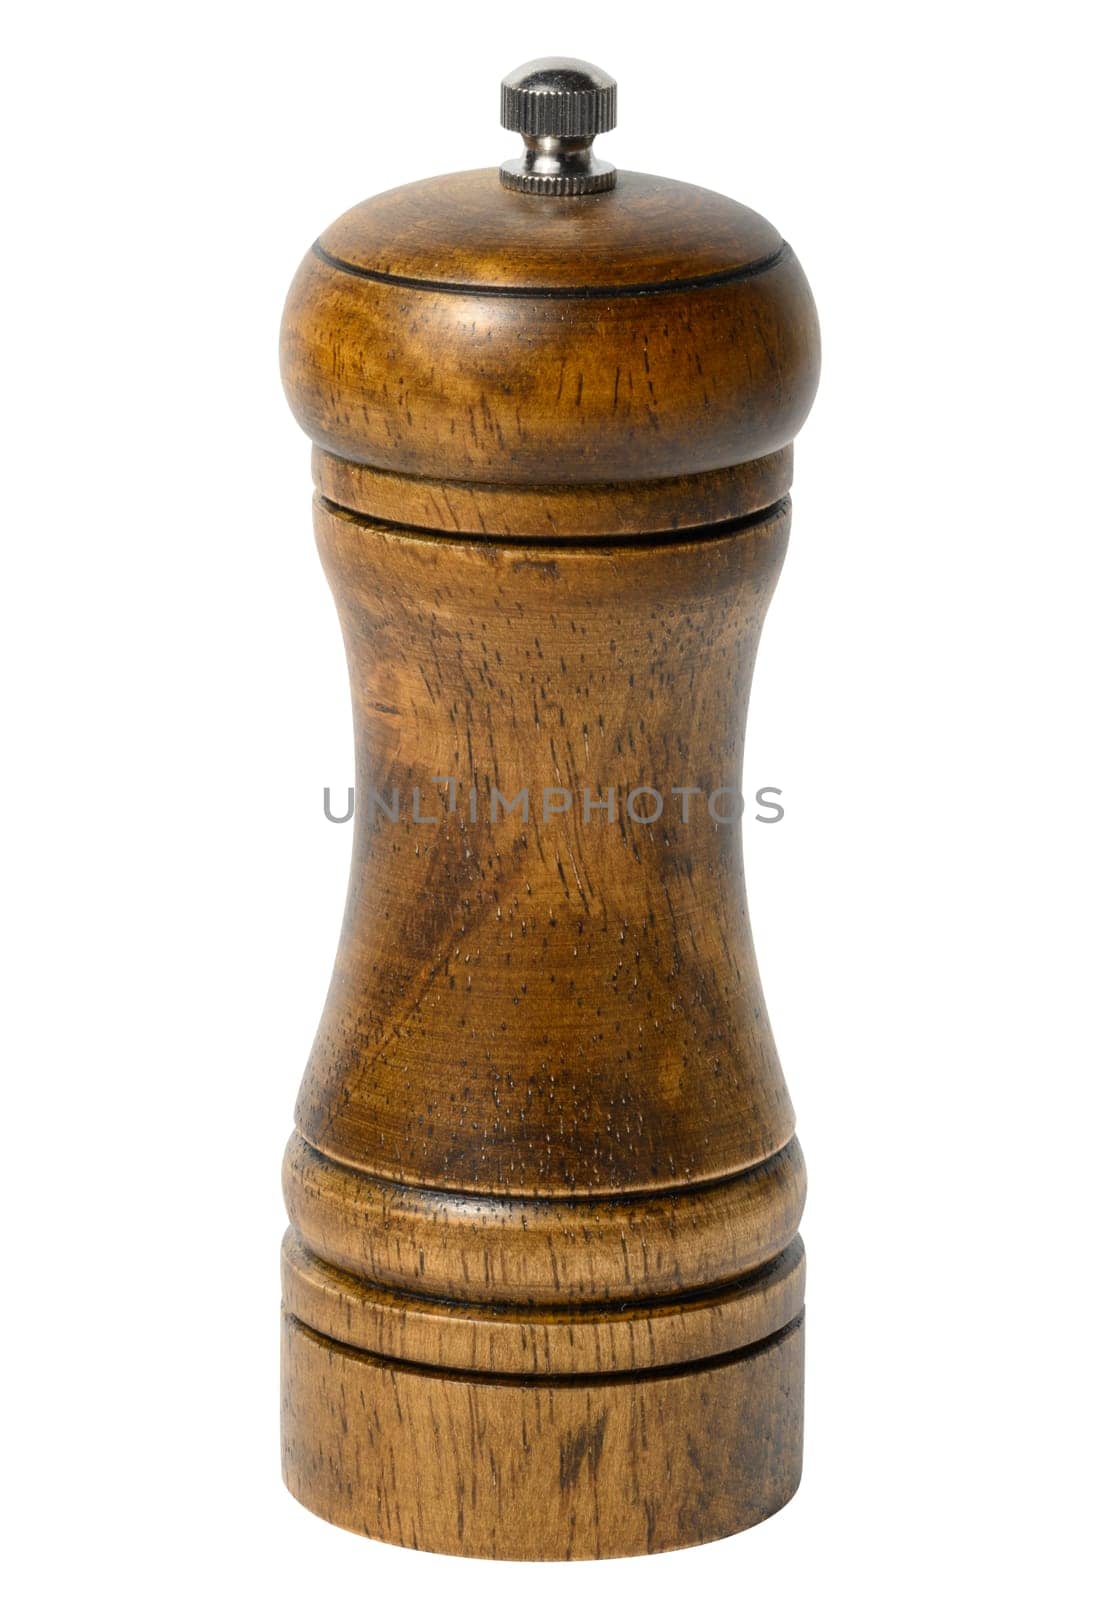 Wooden pepper mill on a white background, made of wood and has a metal handle on top by ndanko